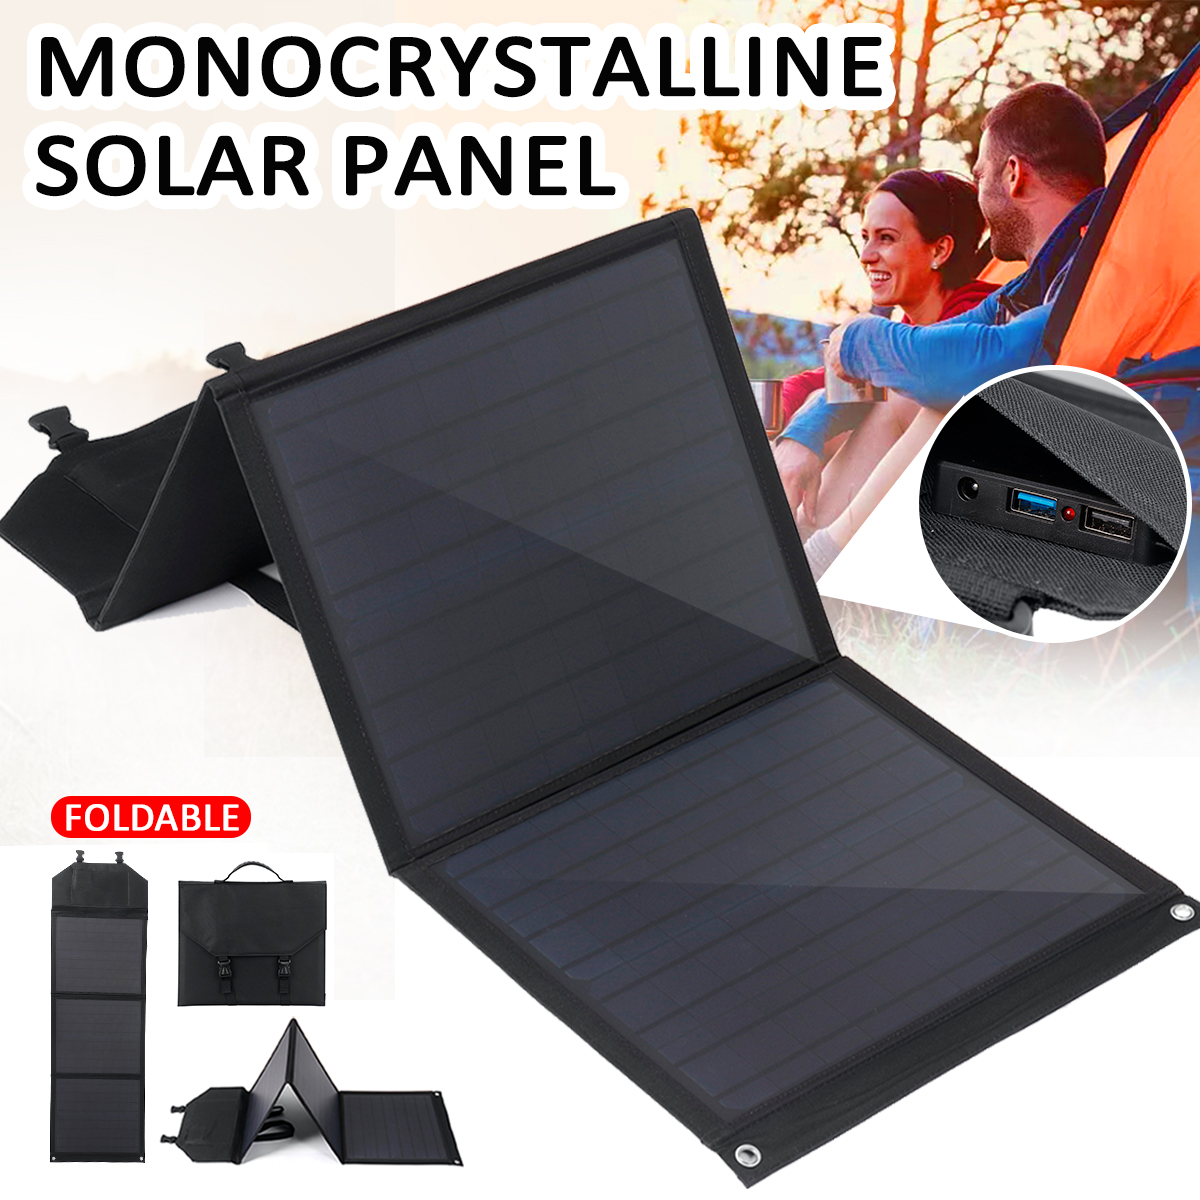 60W-USB-Solar-Panel-Folding-Monocrystalline-PET-Power-Charger--for-Phone-RV-Car-MP3-PAD-Charger-Outd-1905385-3